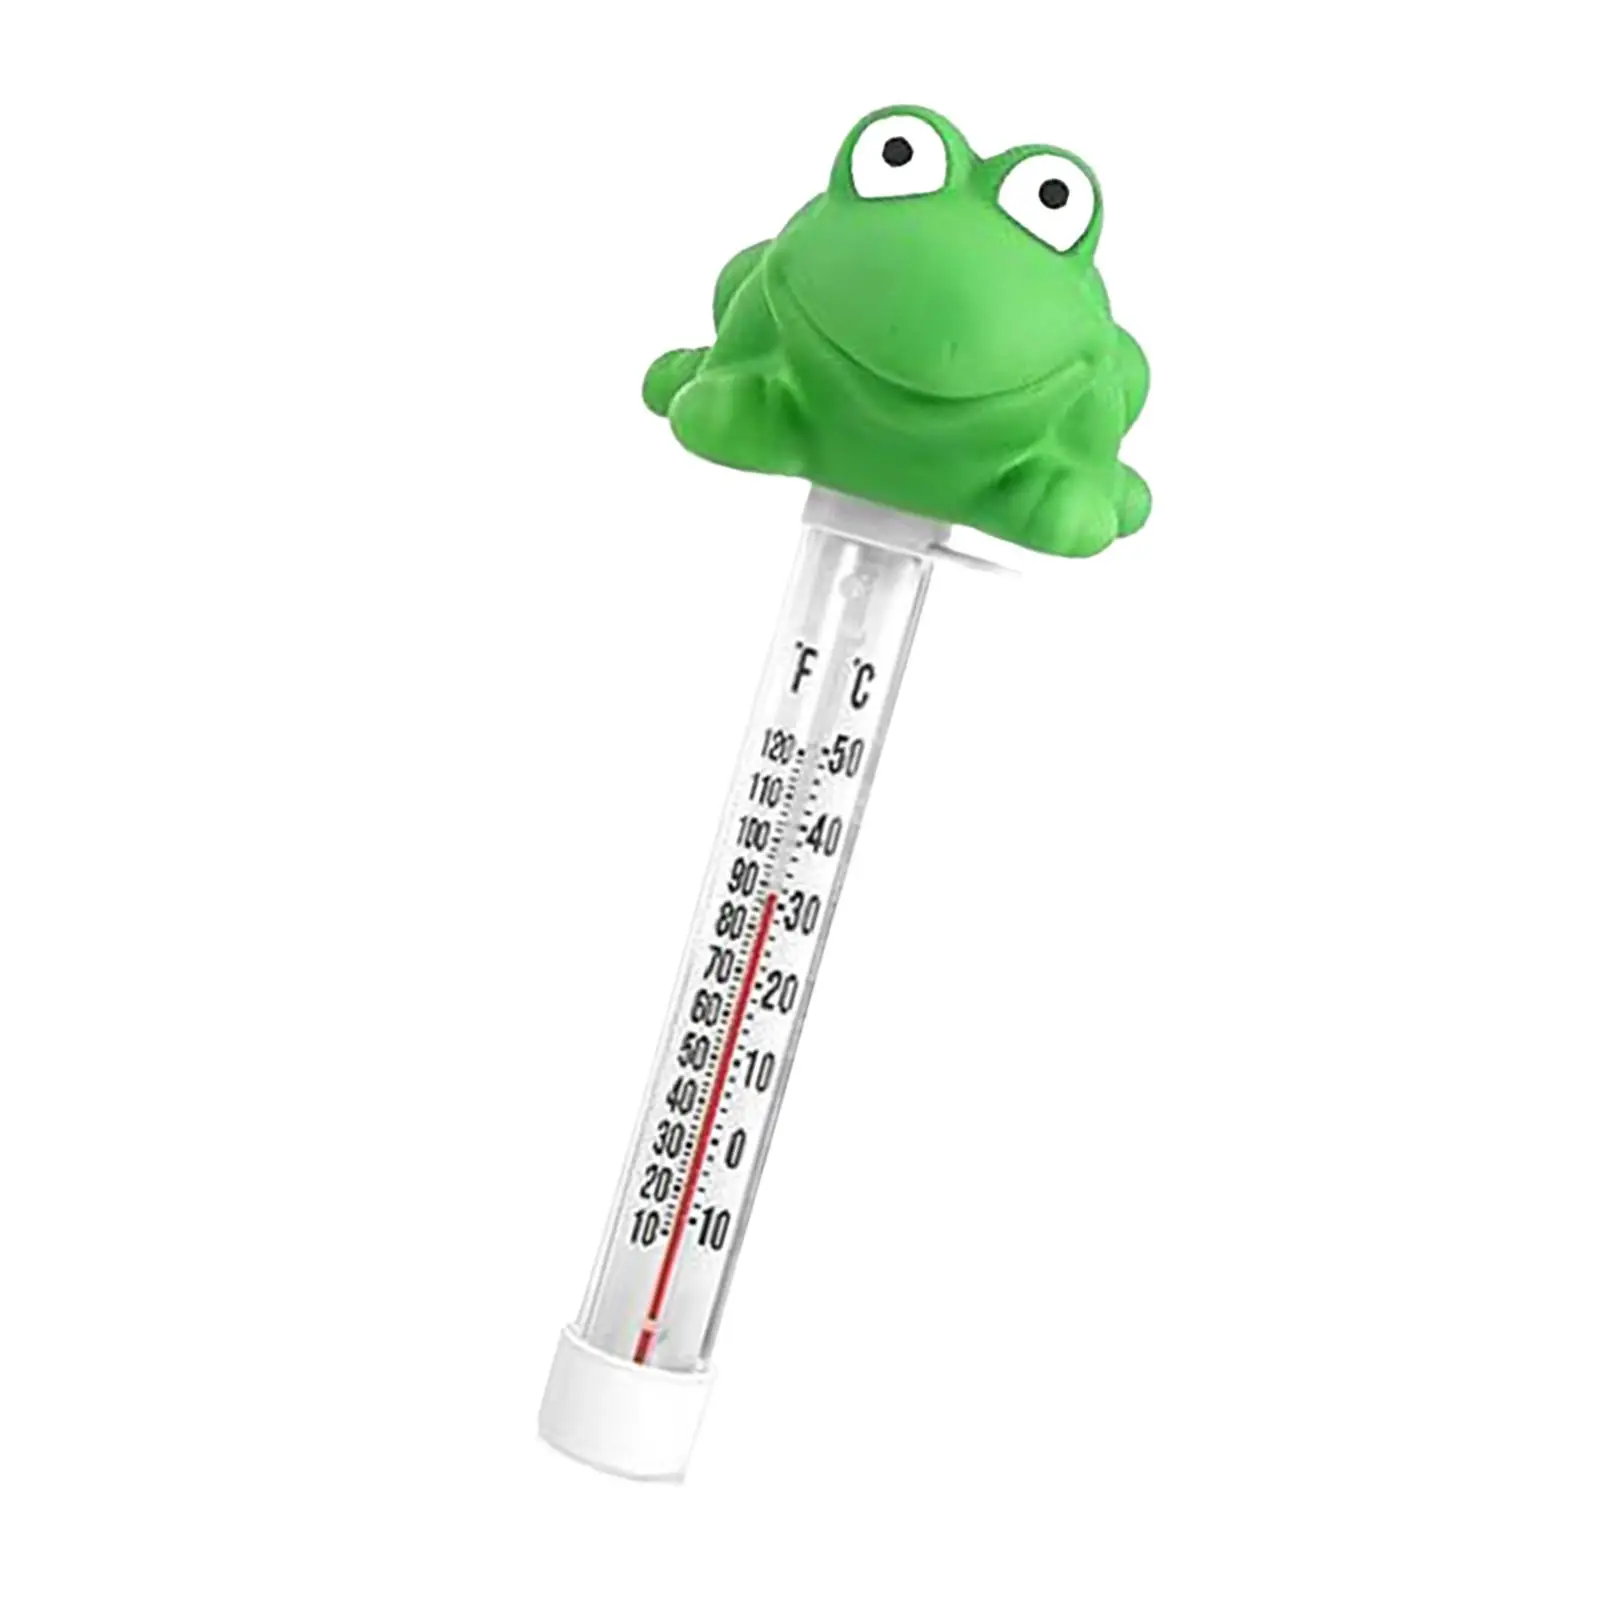 Frog Floating Pool Thermometer Portable SPA Water Thermometer for Fishing Pond Hot Tub Fish Tank Paddling Pool Water Temperature